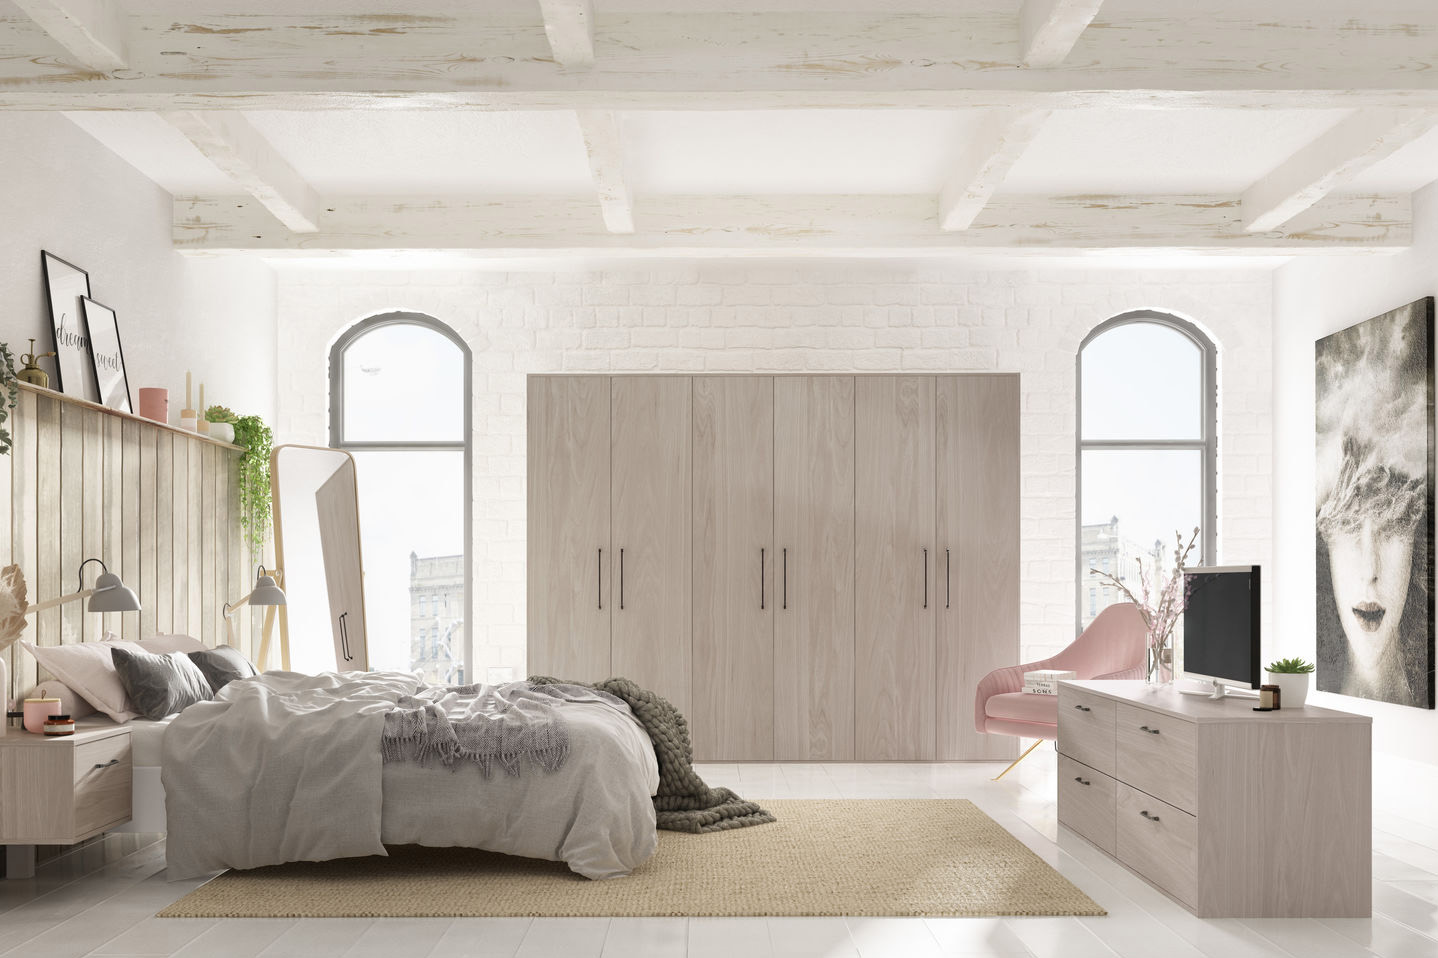 The Dawn Grey Walnut range offers a sleek and contemporary aesthetic while still retaining a sense of warmth and cosiness, making it an ideal choice for creating a neutral and inviting bedroom environment